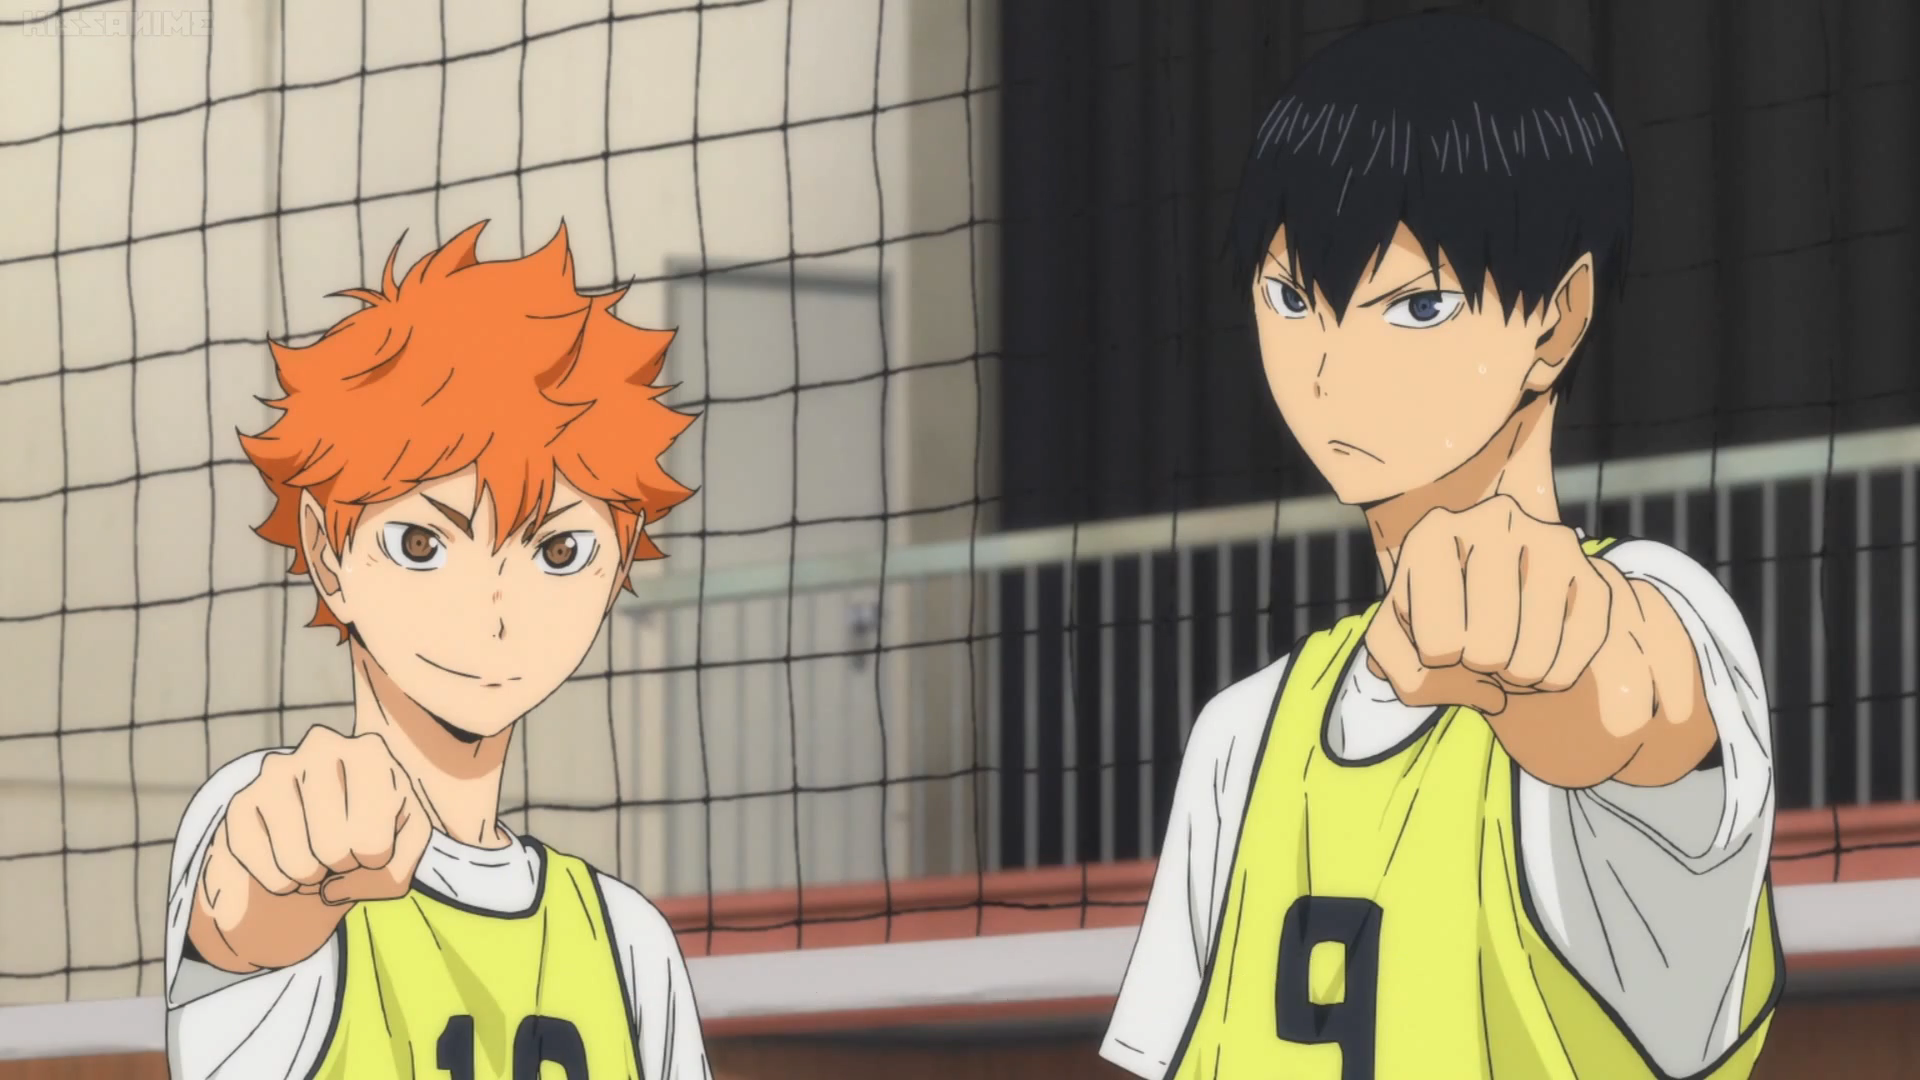 What's special about Hinata and Kageyama as players, teammates